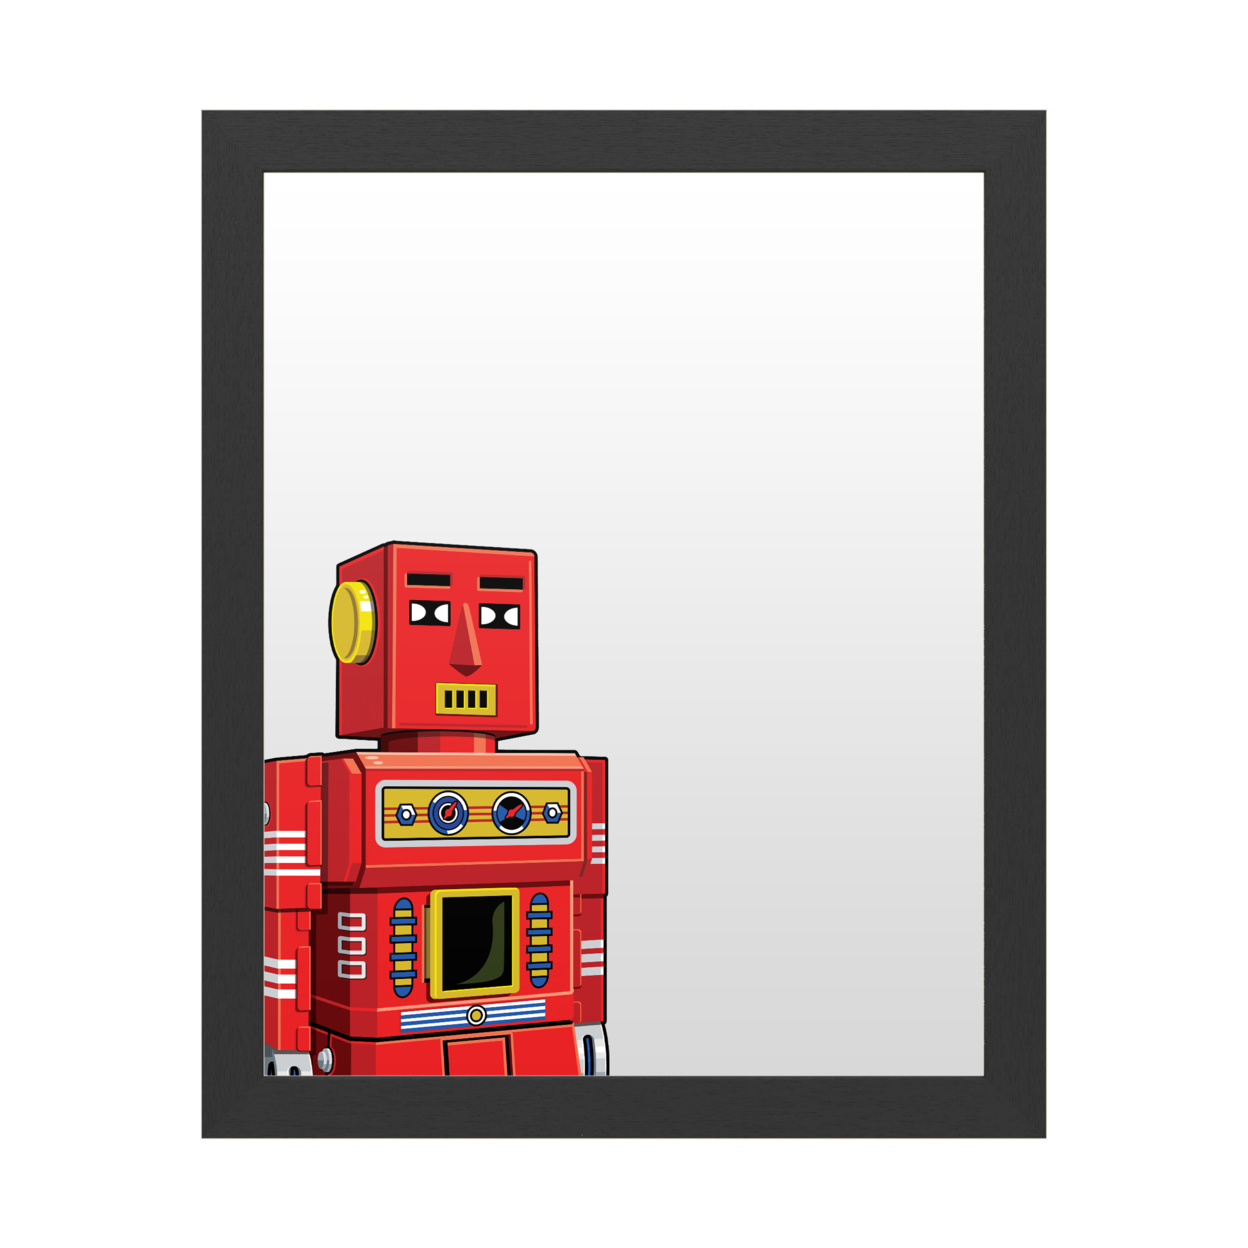 Dry Erase 16 X 20 Marker Board With Printed Artwork - Ron Magnes Vintage Red Robot White Board - Ready To Hang